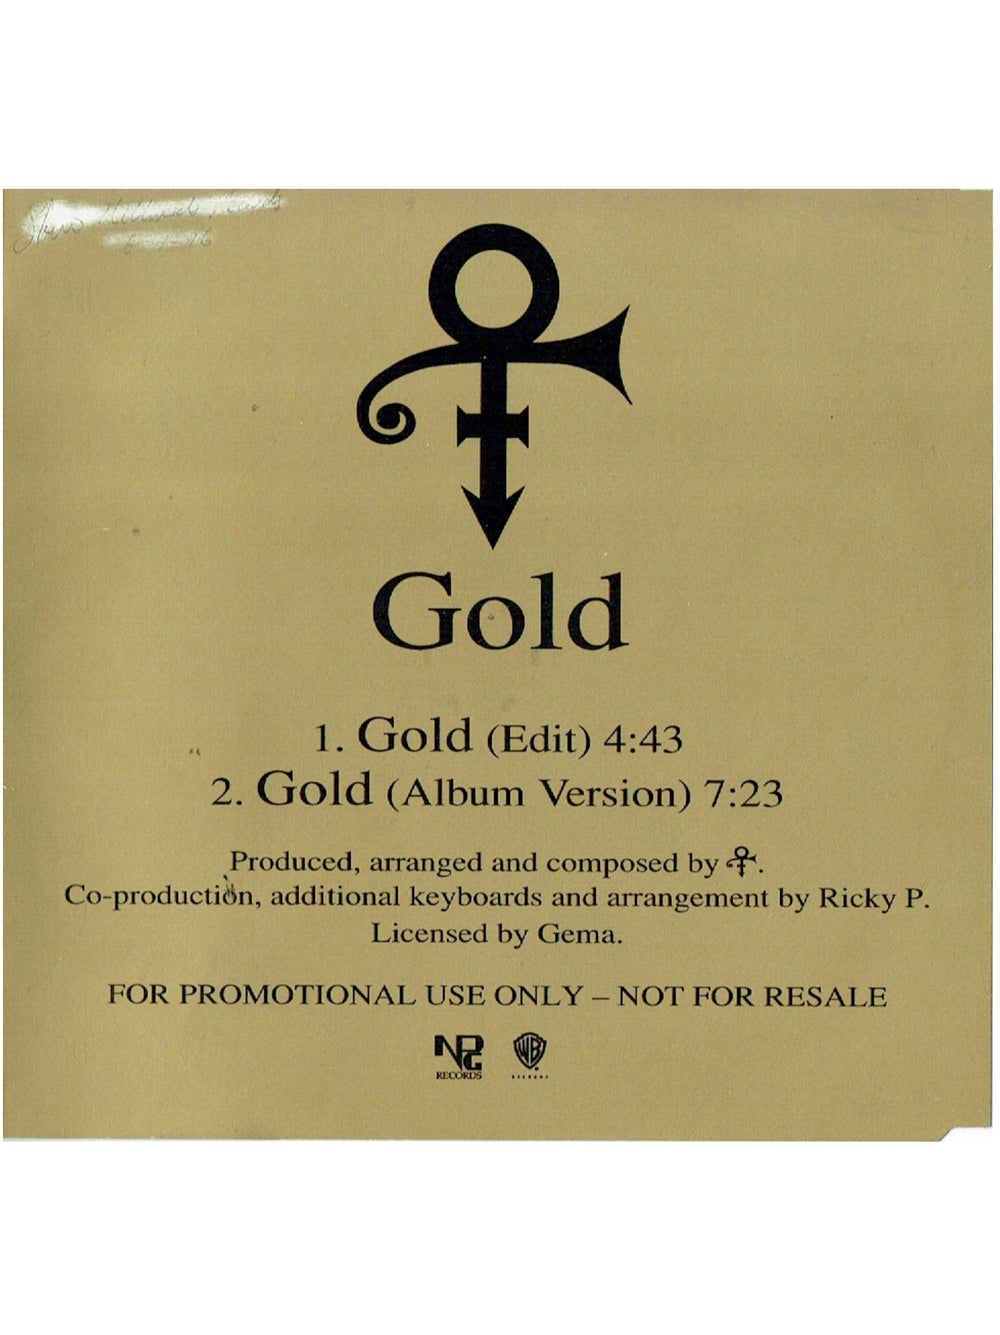 Prince – O(+> Gold Promotional Only CD Single 2 Track EU Release 1995 Prince